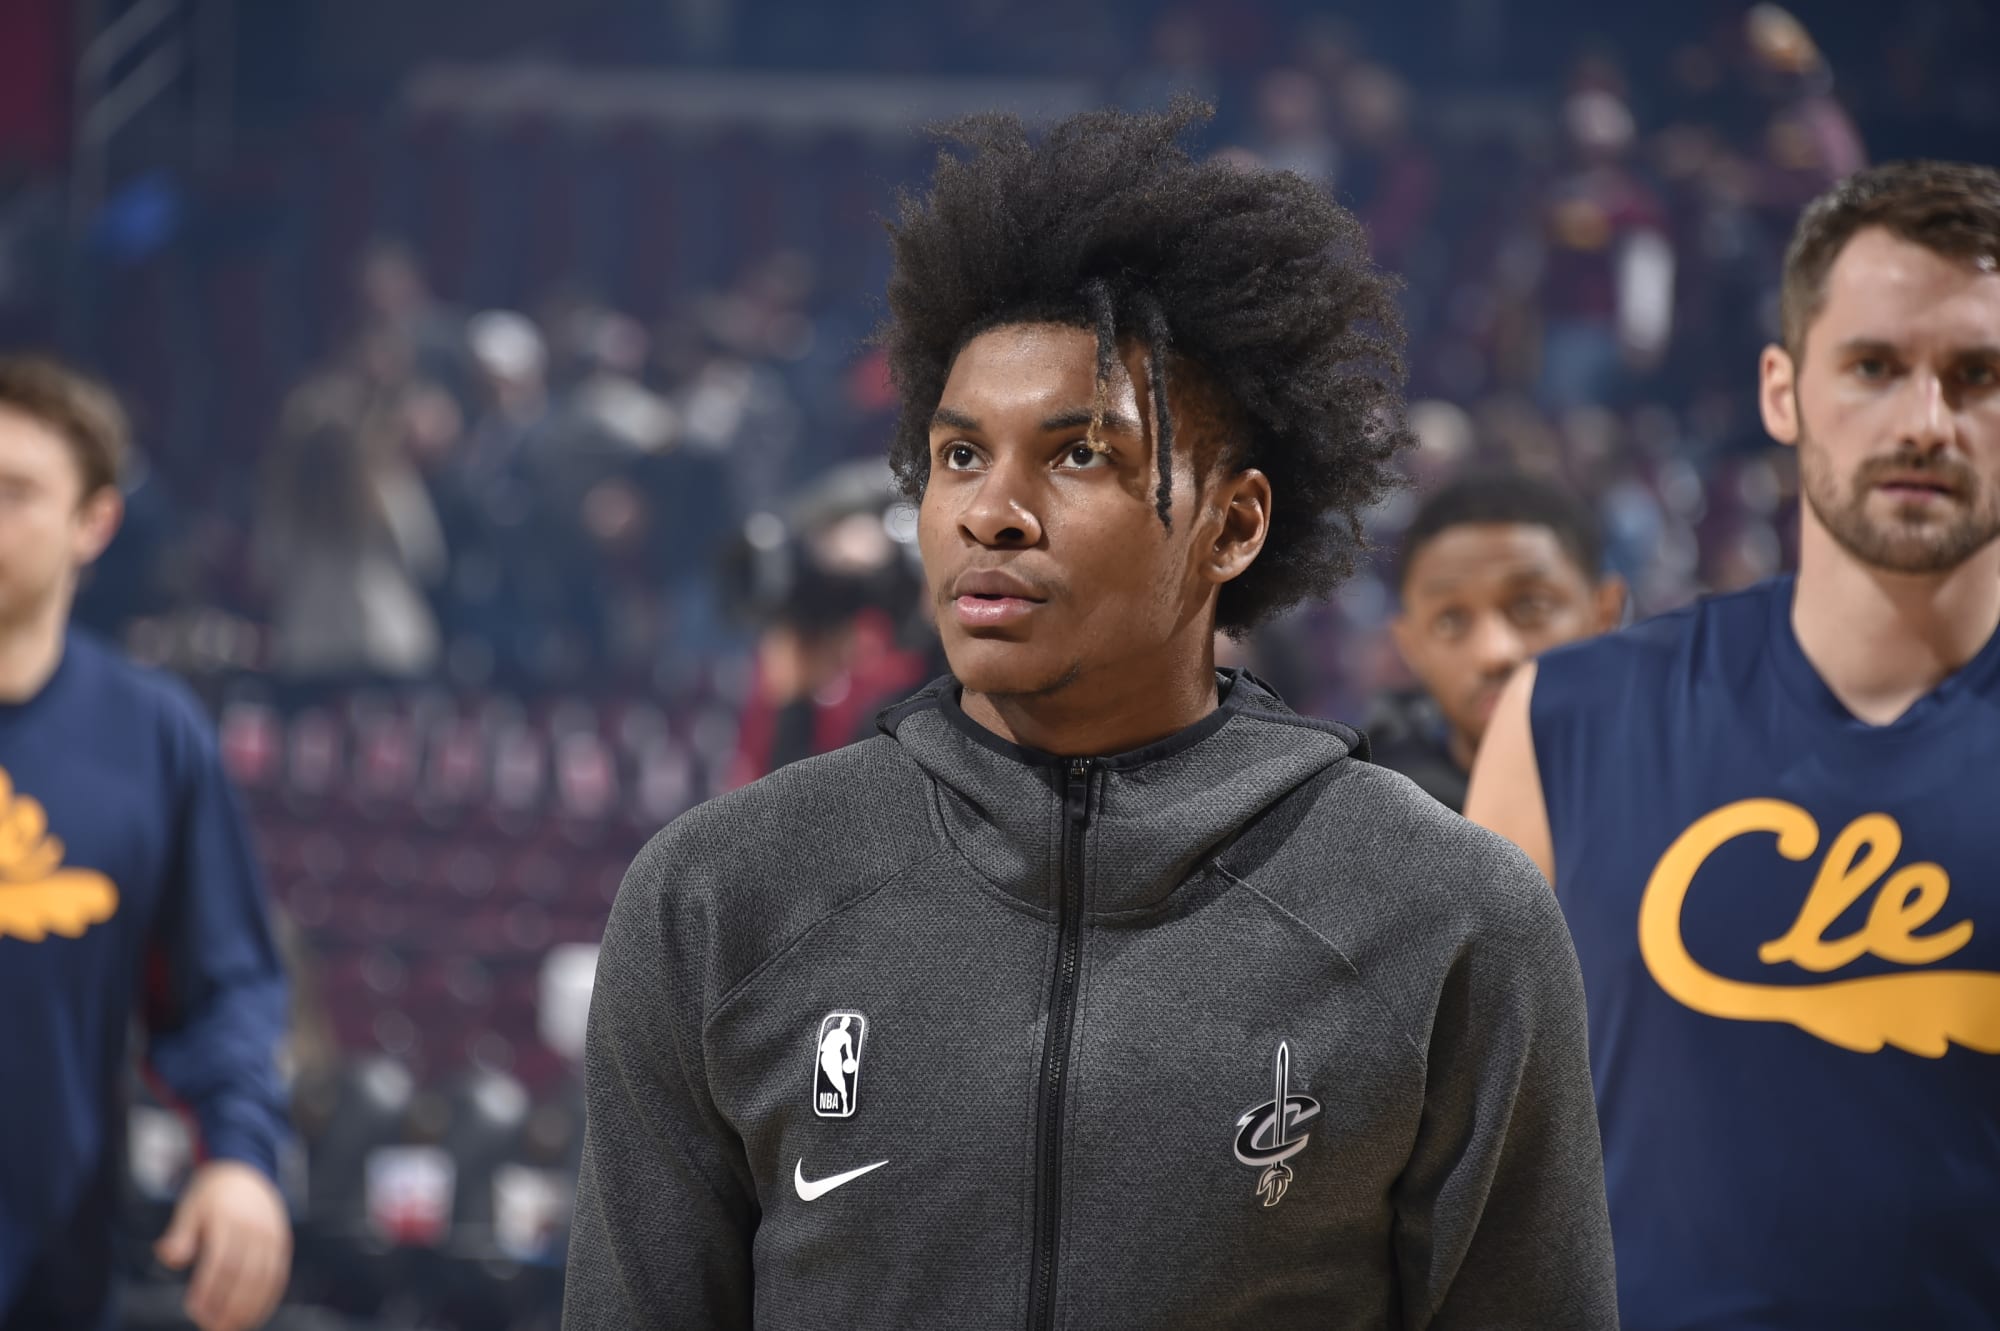 Kevin Porter jr about to shock some people. Got the 4 in Cleveland. Sick.